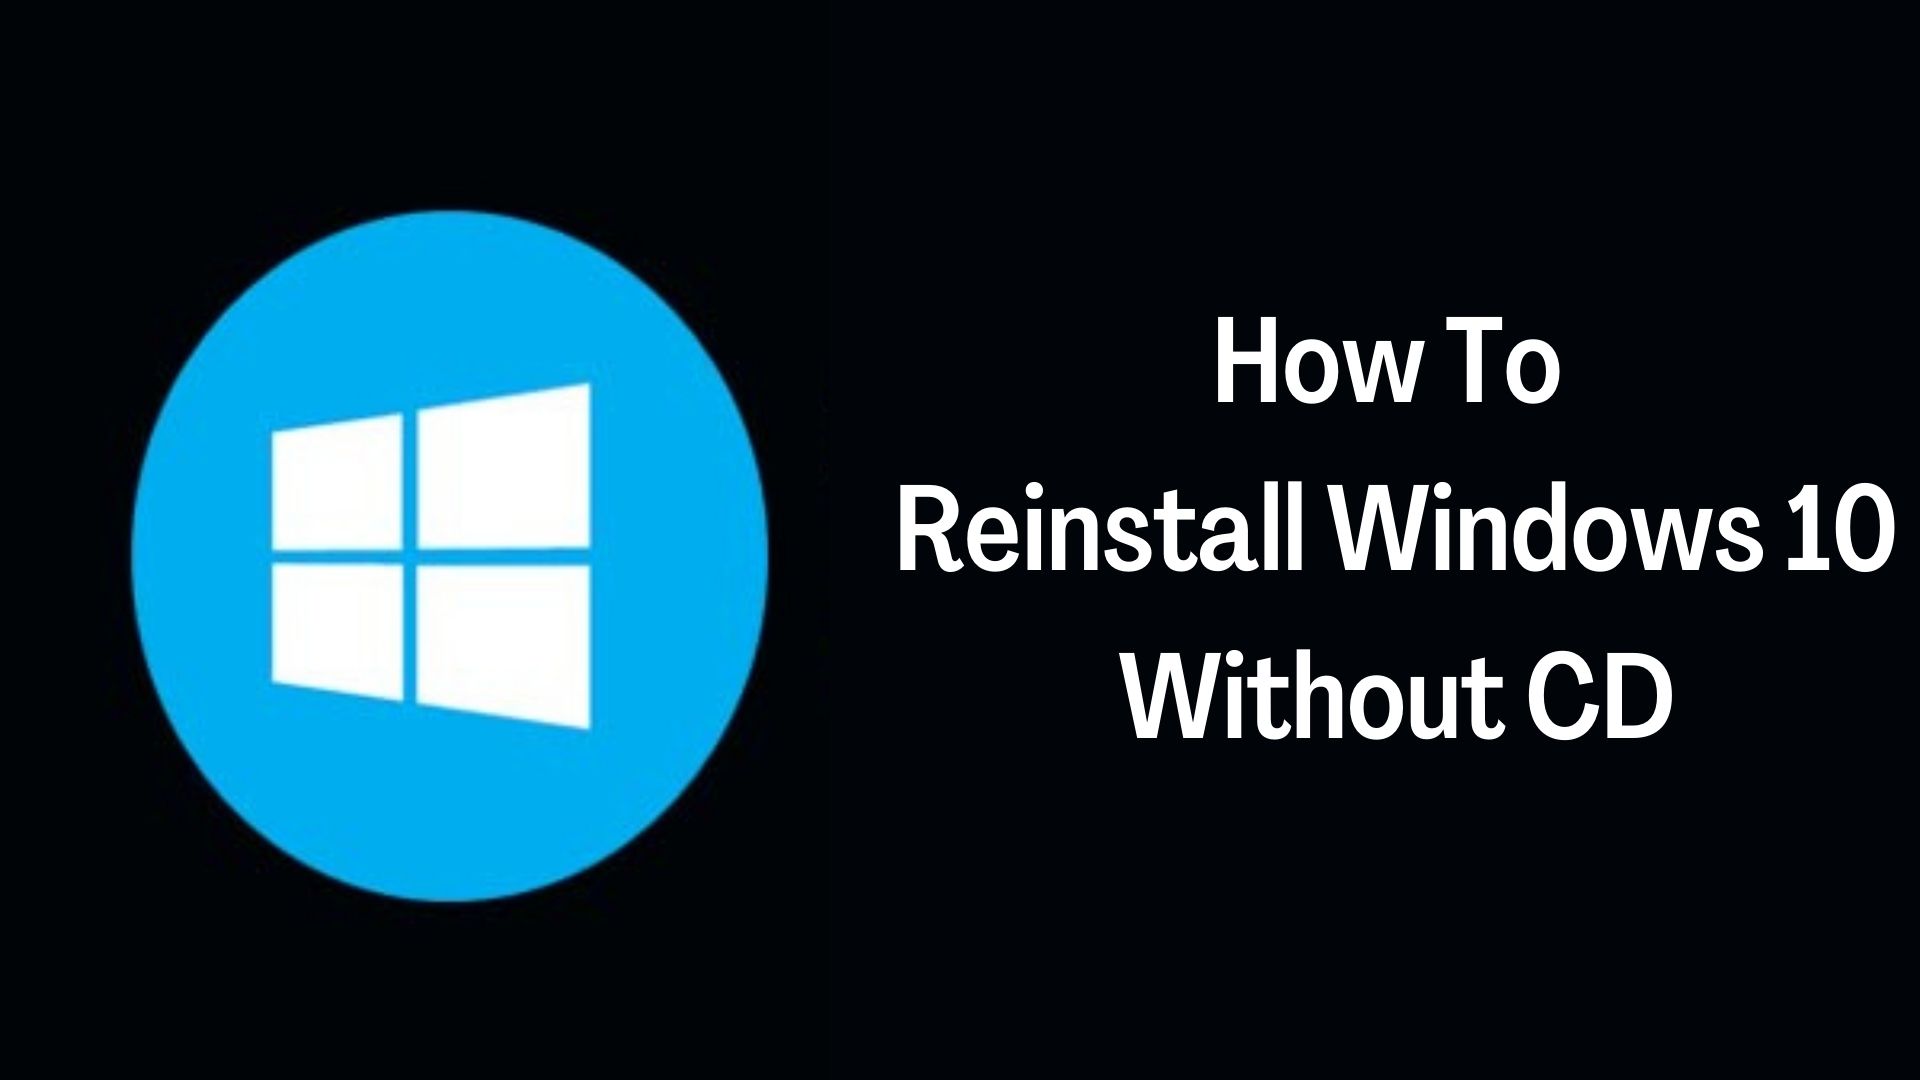 How To Reinstall Windows 10 Without CD